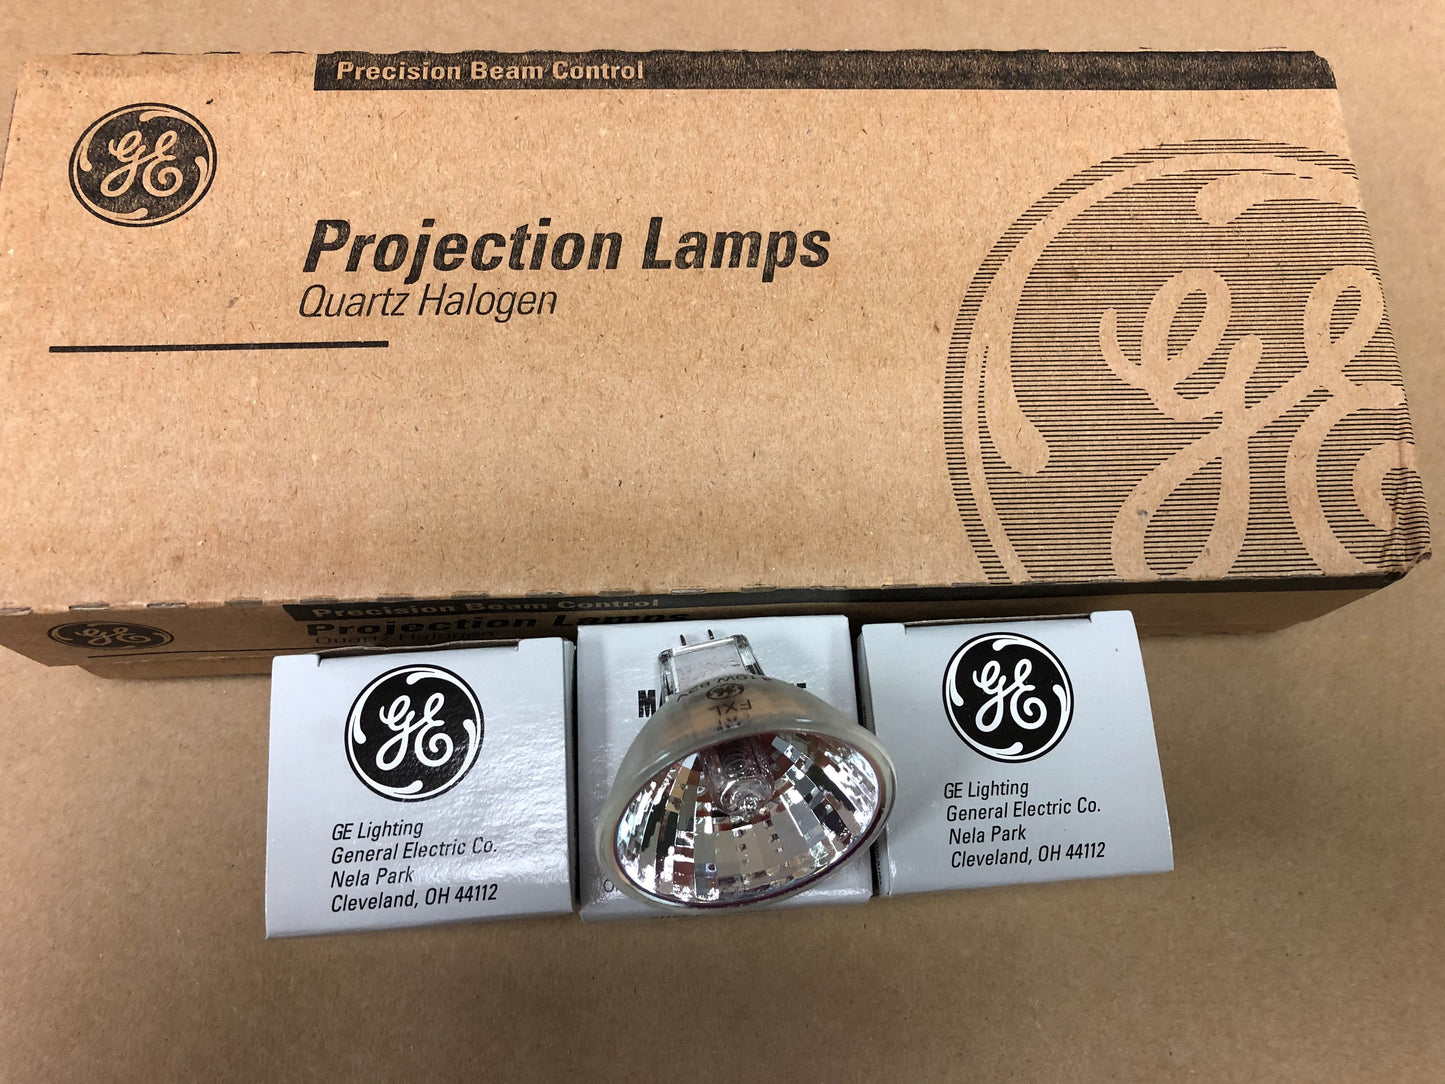 Upgrade Your Lighting: 20-Pack GE FXL Projector Lamps (410W, 82V)